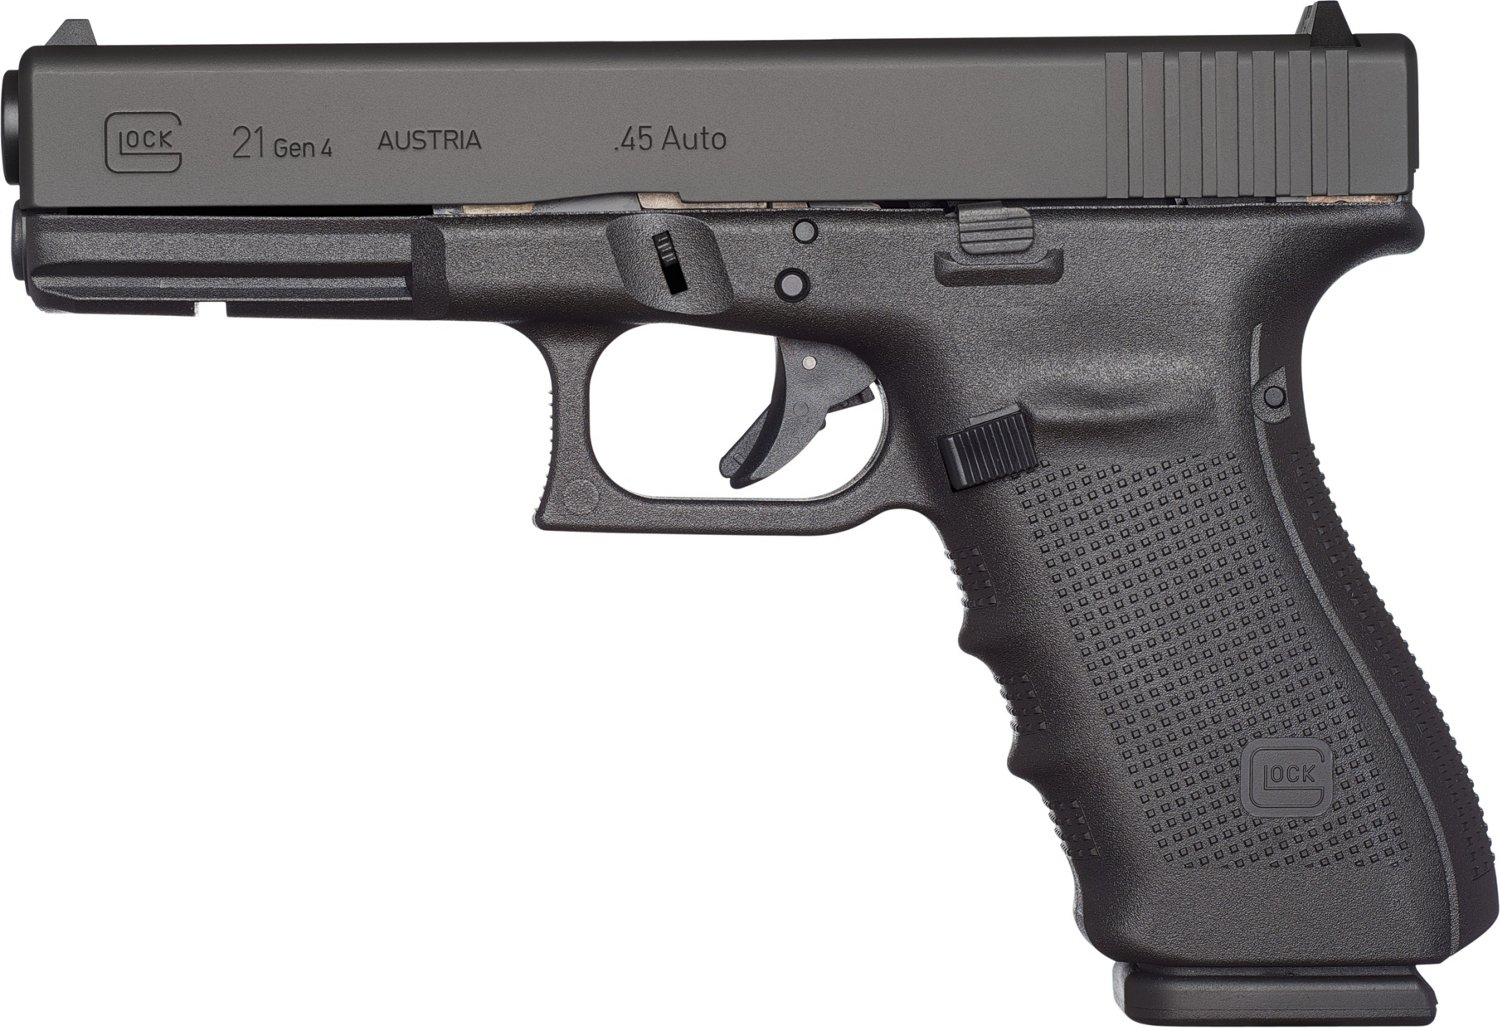 Glock G21 Review